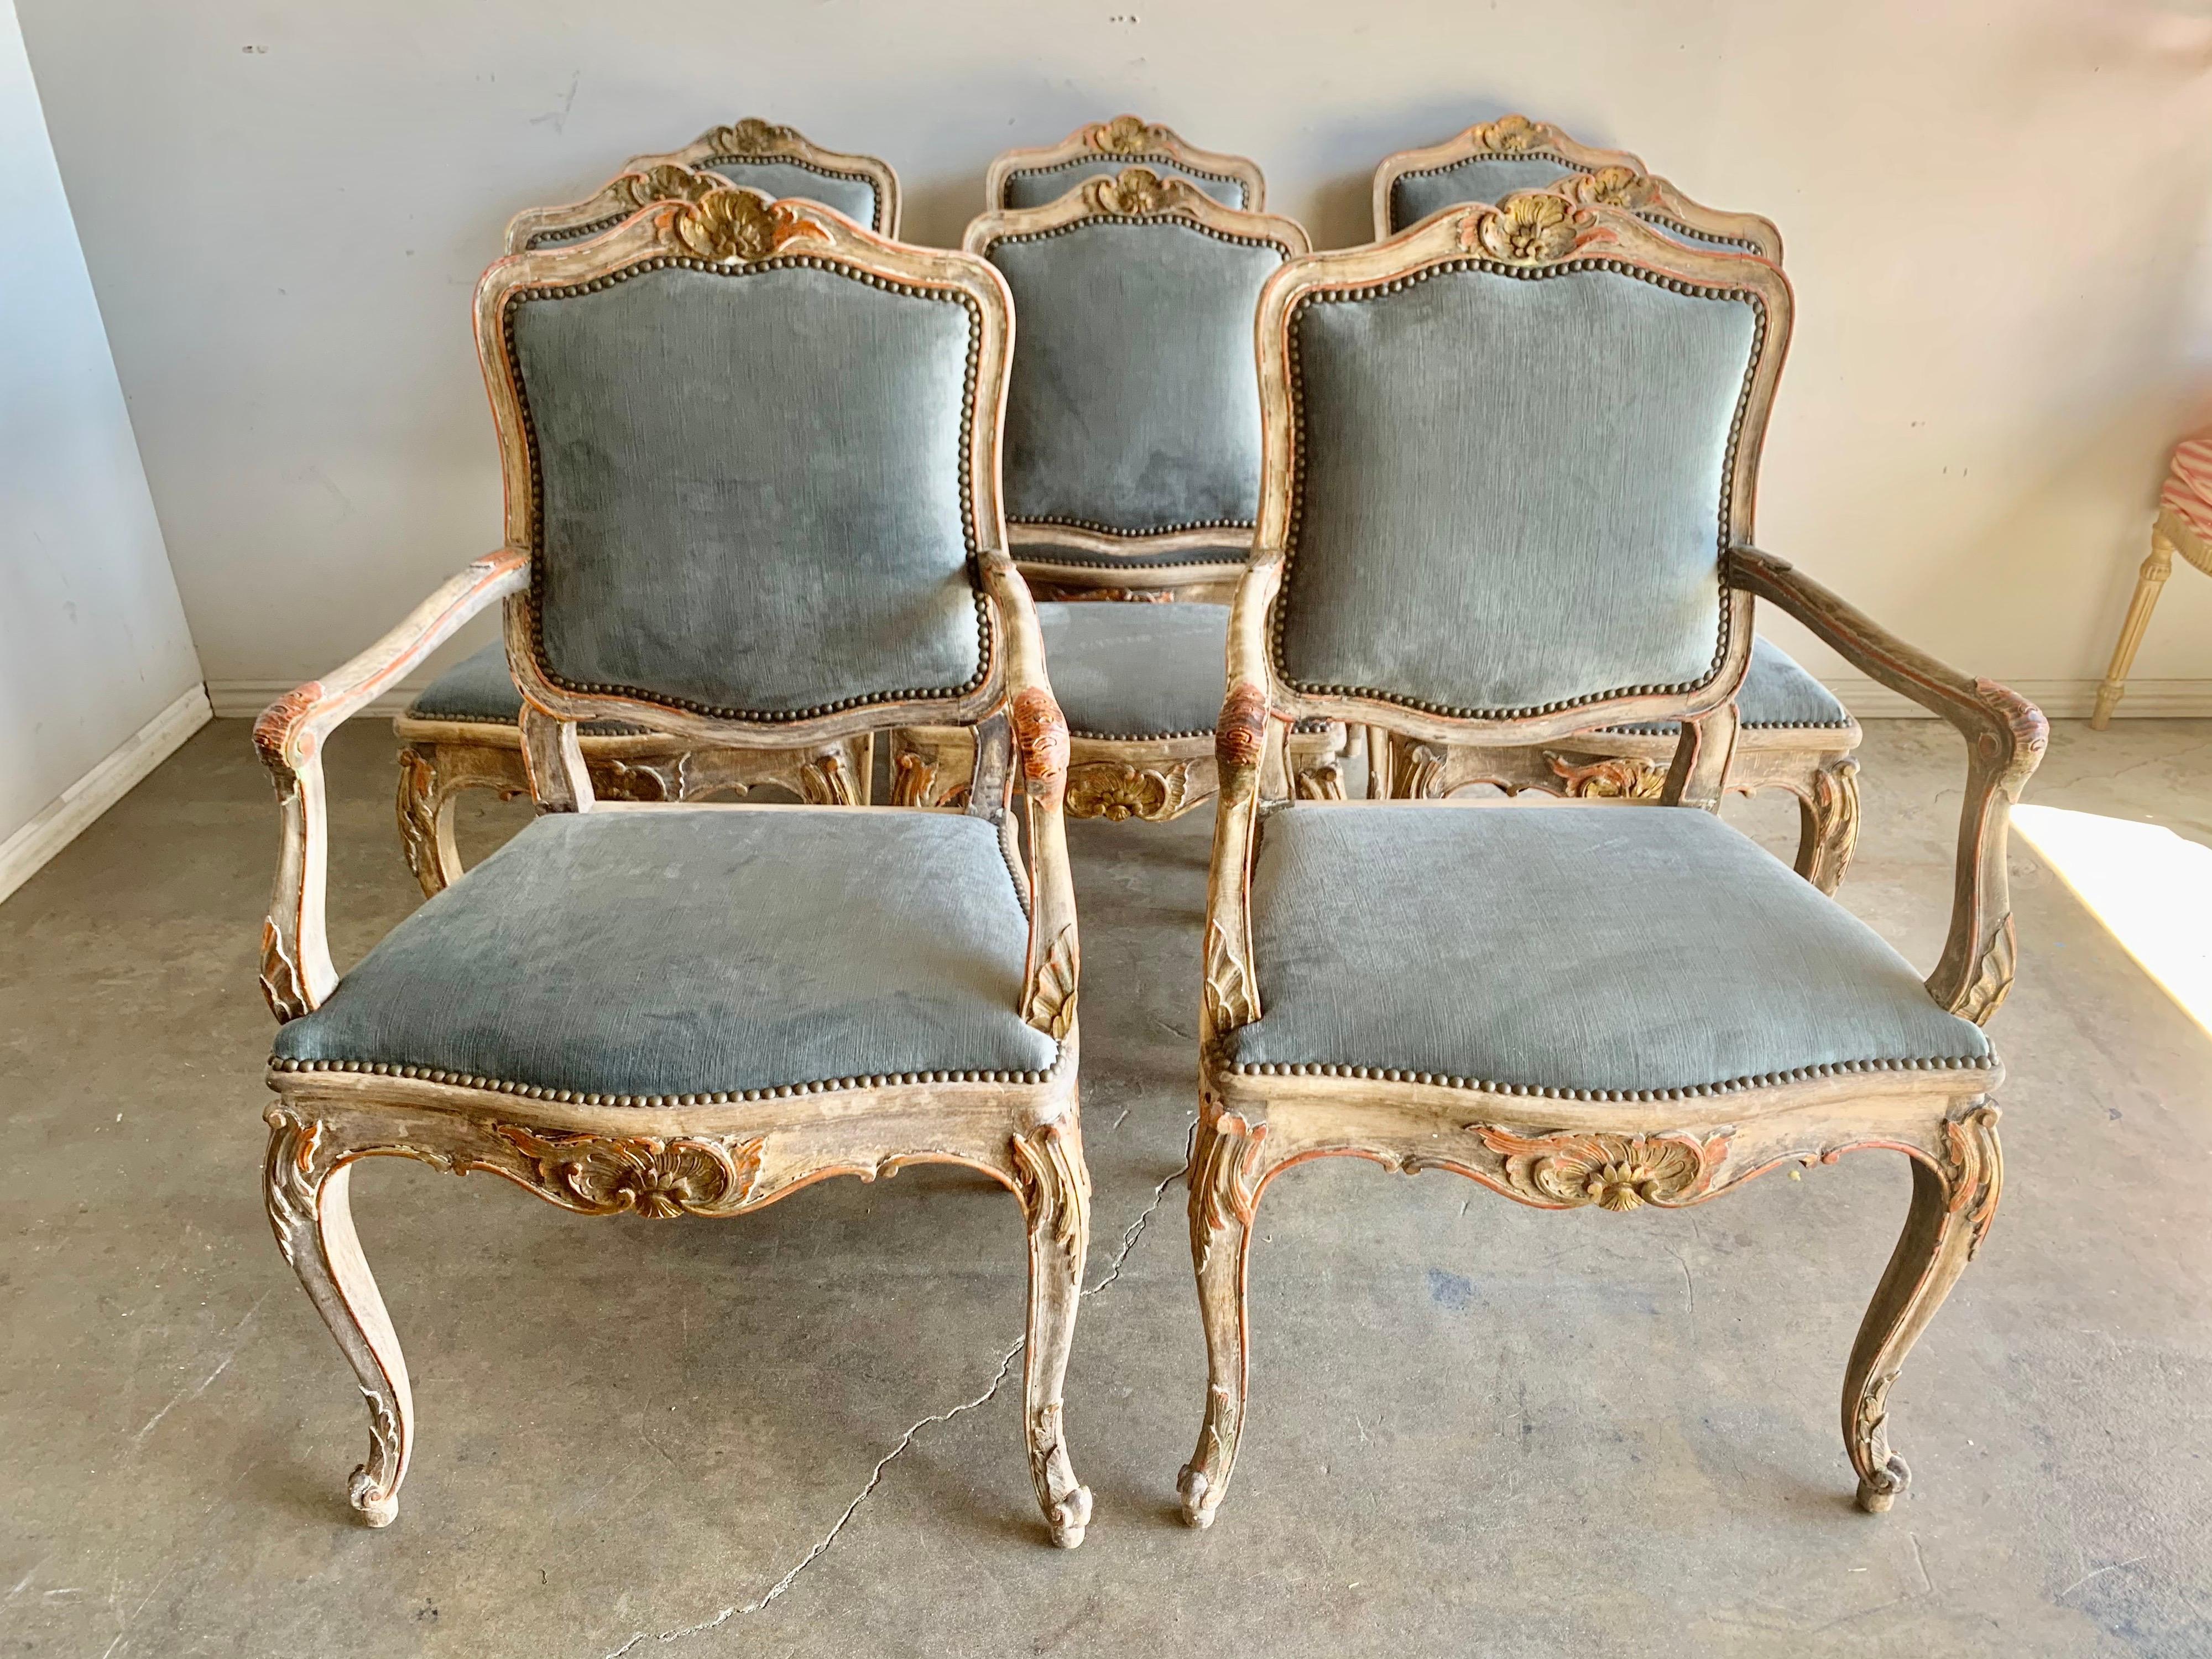 Set of eight carved French Lois XV style dining chairs with a painted and parcel gilt finish. The chairs stand on four cabriole legs with rams head feet. The chairs are newly upholstered in a steel blue velvet and detailed with antique brass